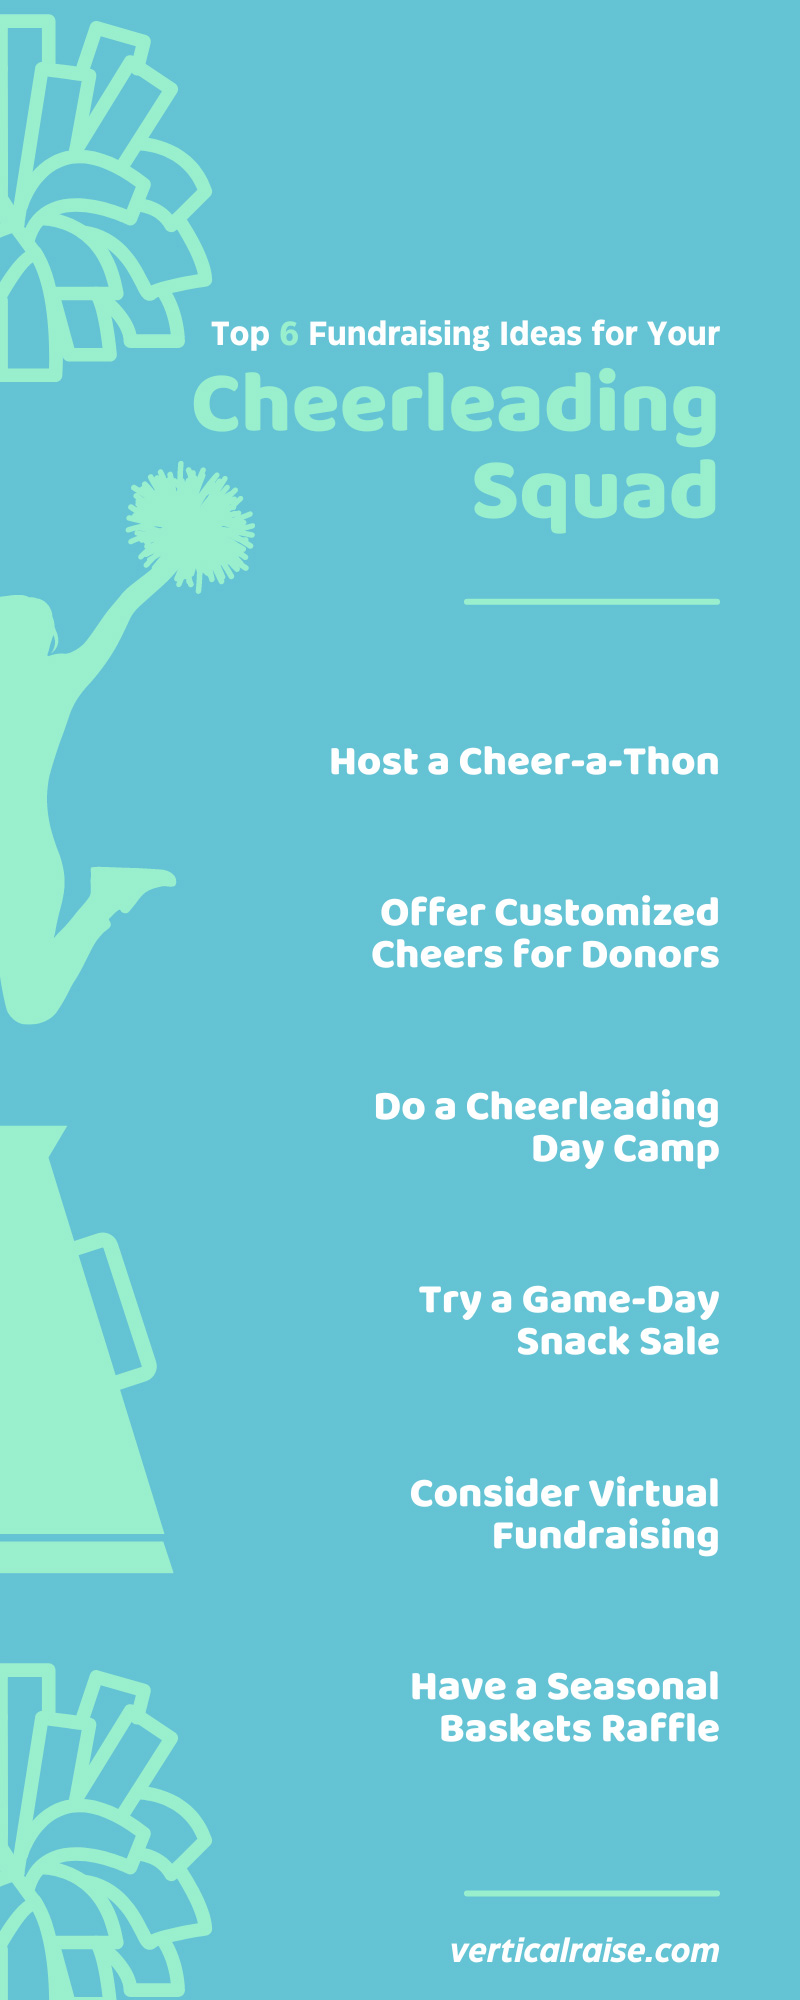 Top 6 Fundraising Ideas for Your Cheerleading Squad